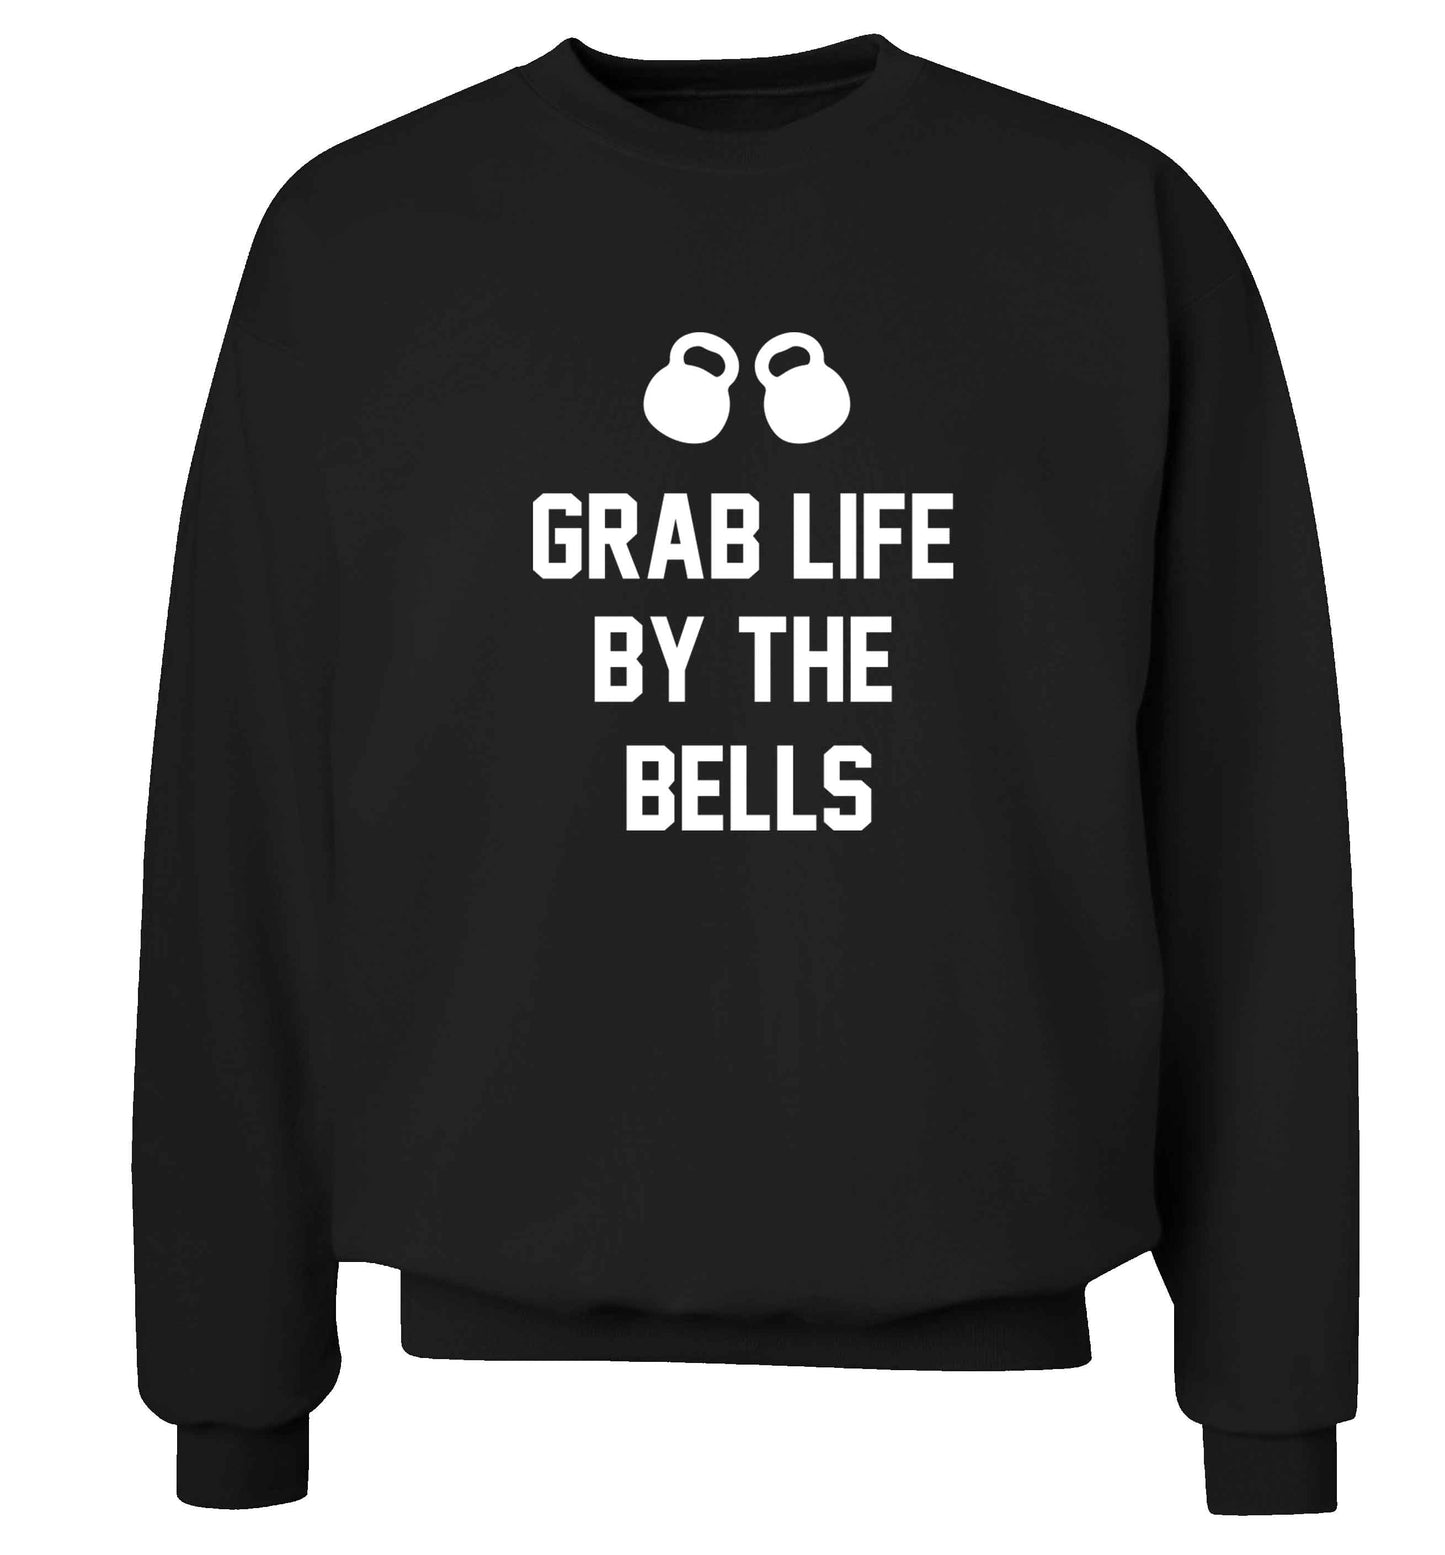 Grab life by the bells adult's unisex black sweater 2XL